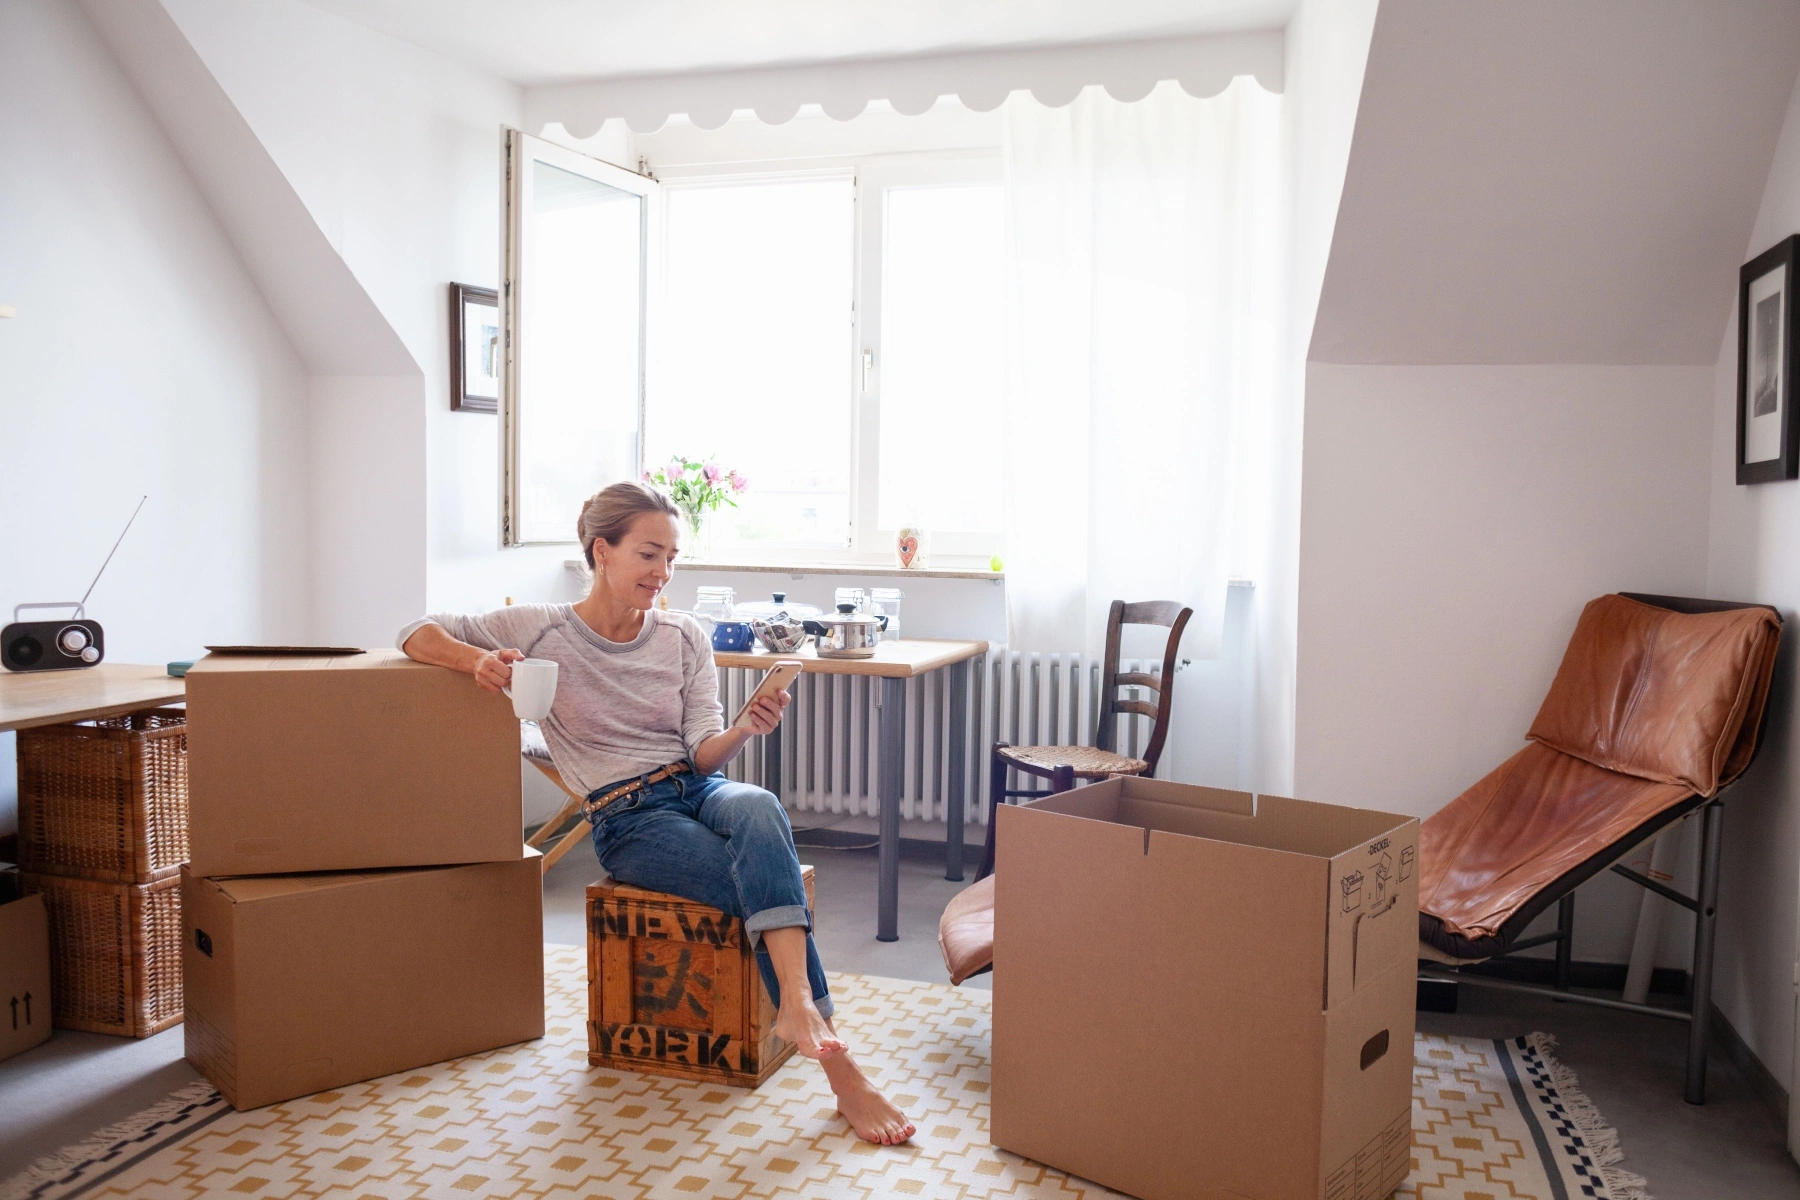 Woman checking her phone and sitting amidst moving boxes